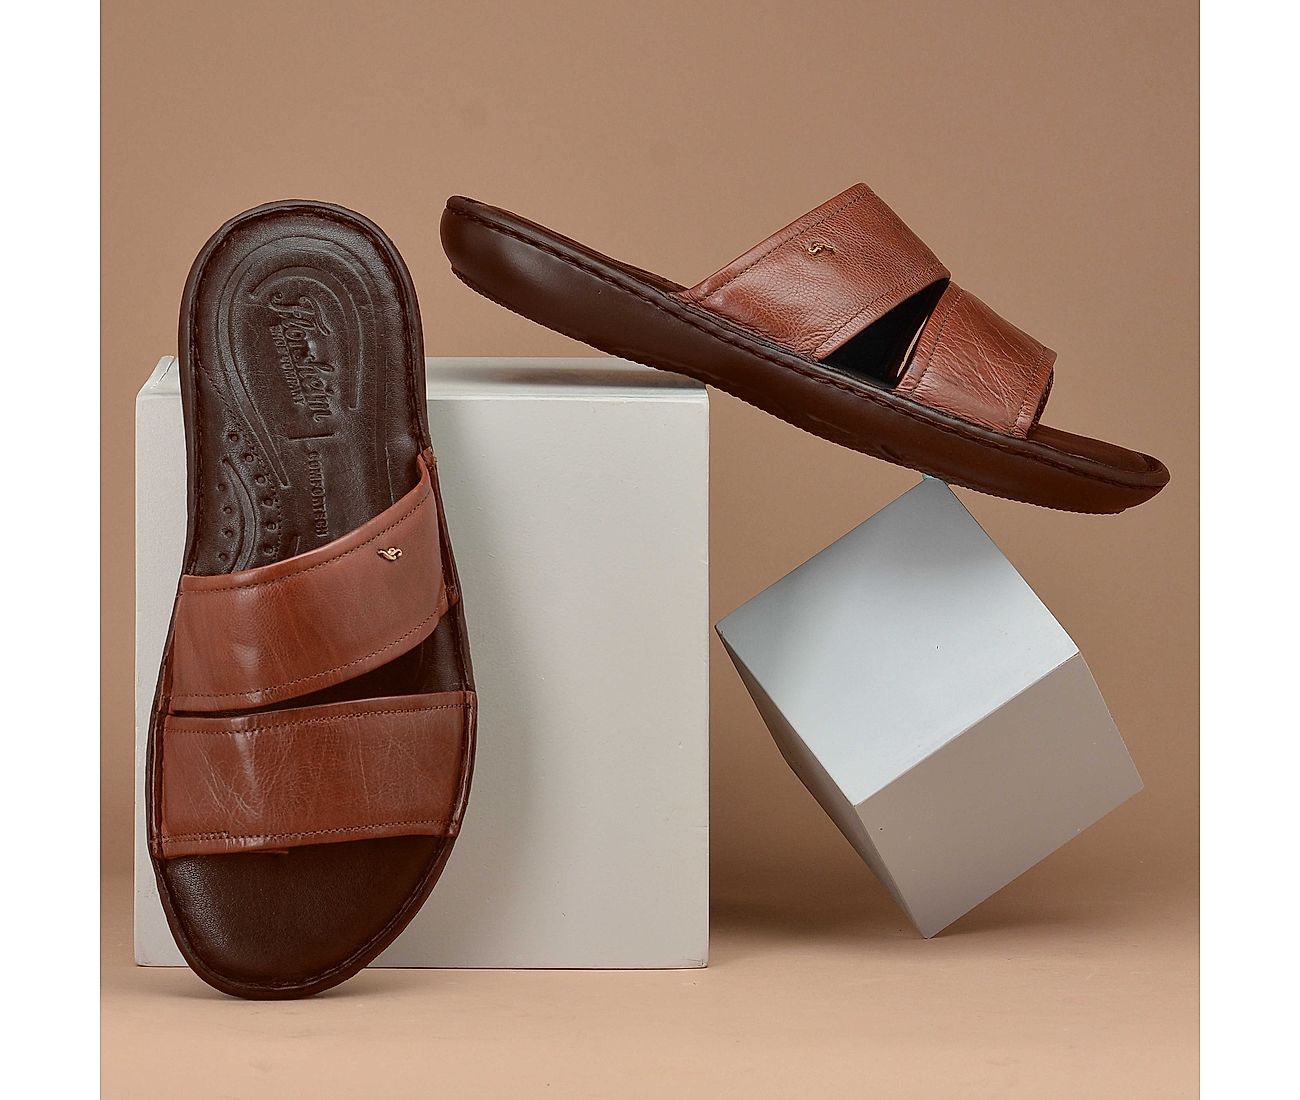 The Kubua Men's Flip-flops Are a Summer Must-have